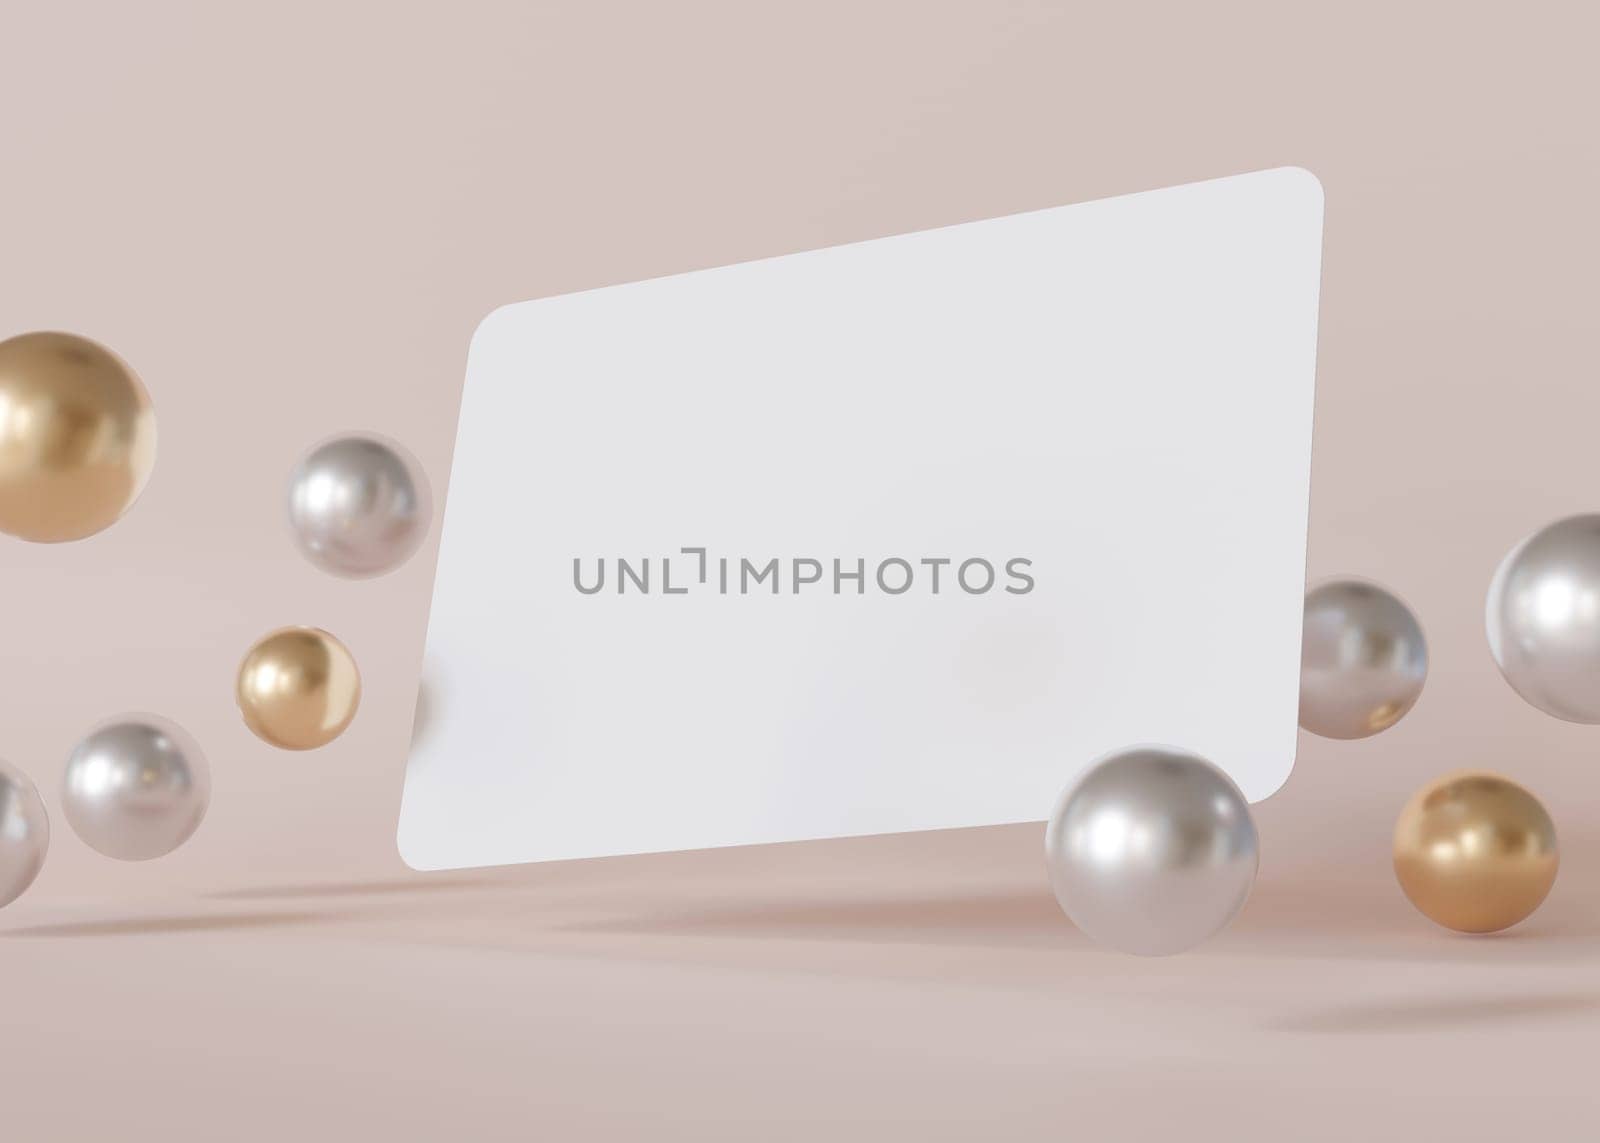 Chic white business card mockup surrounded by floating metallic spheres on a delicate beige background, ideal for trendy and artistic brand display. European size, 3,25 x 2,17 inch. Visiting card. 3D